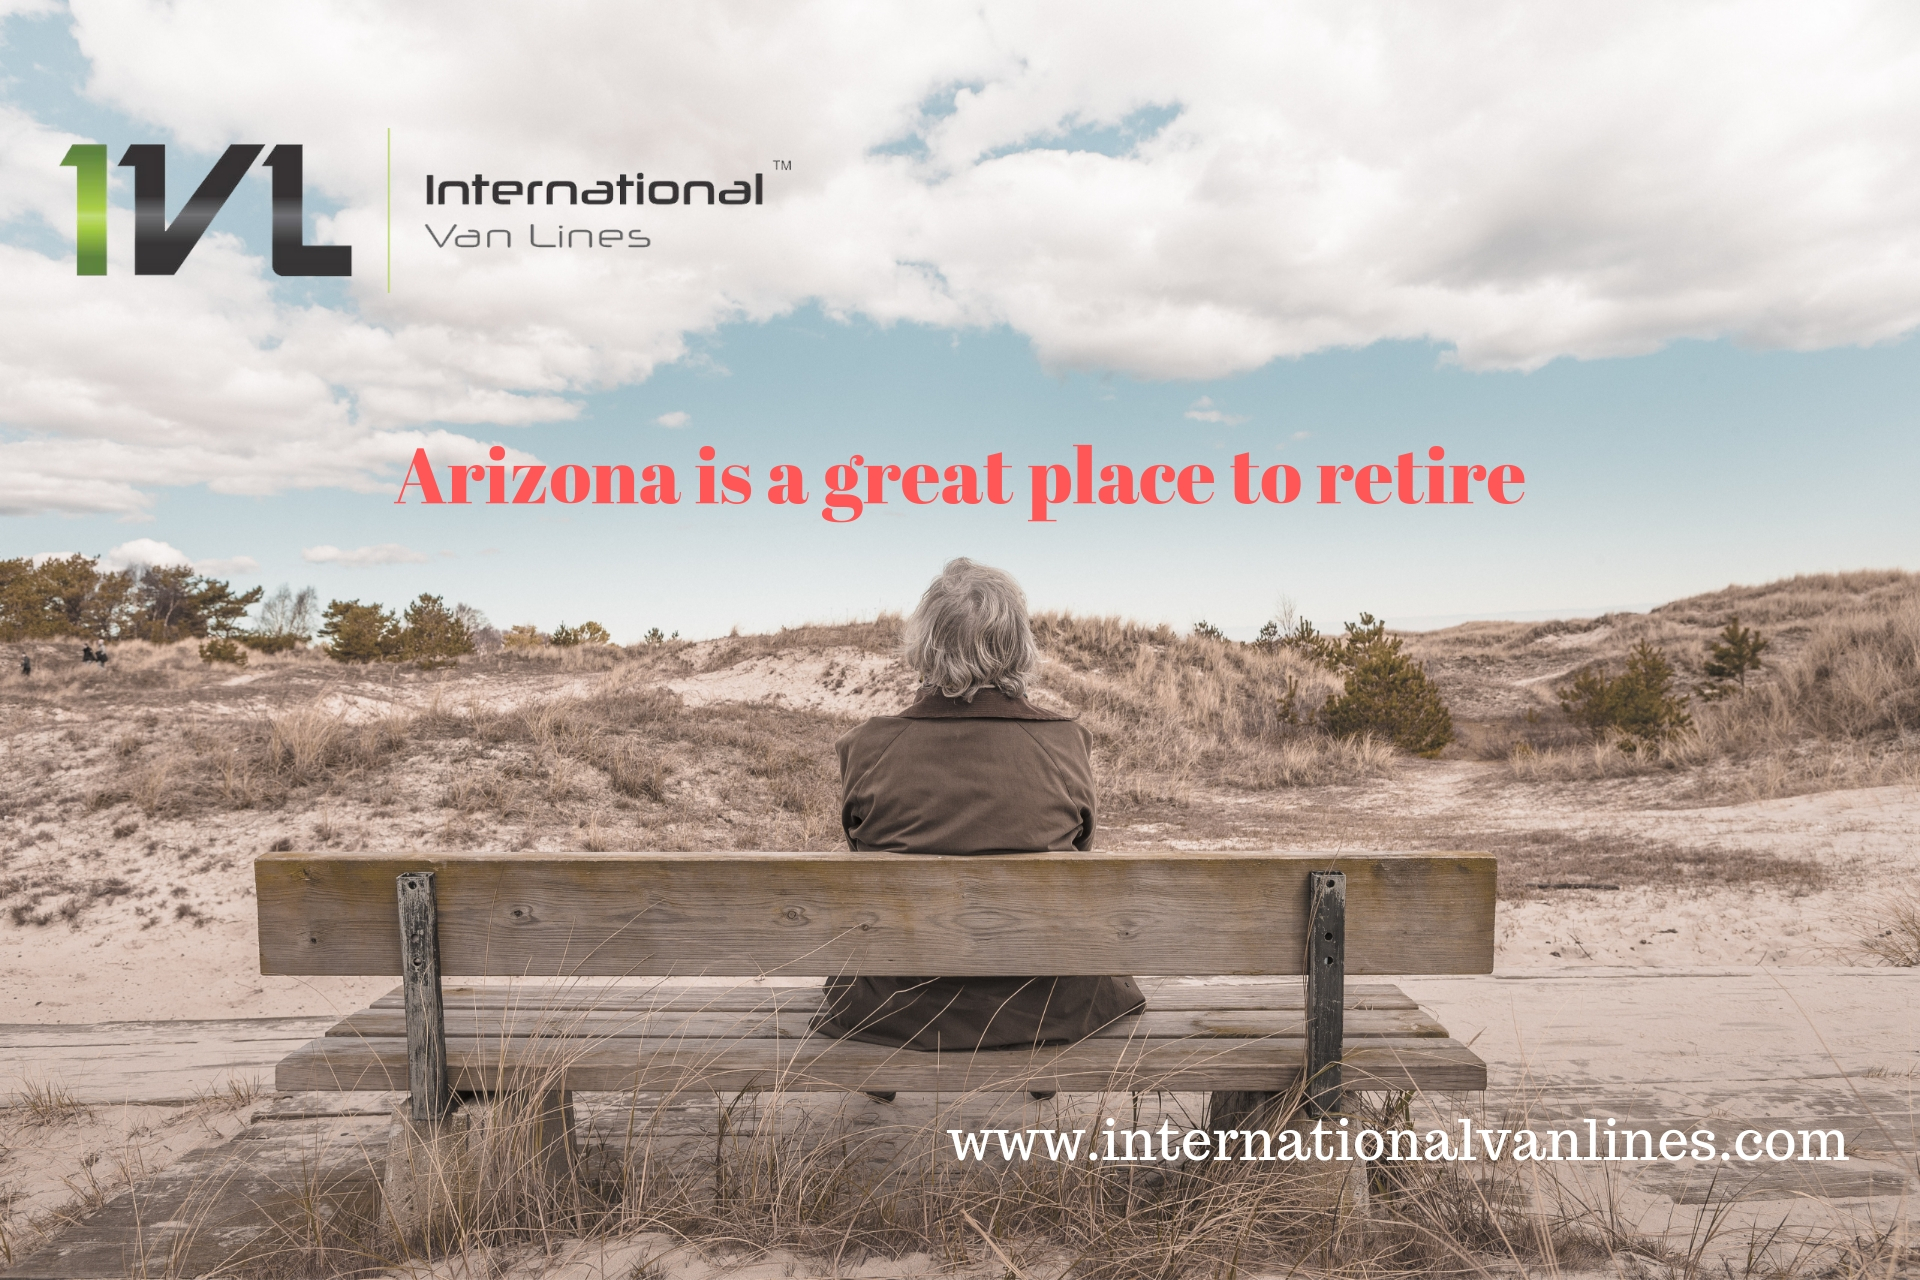 Arizona is a great place for retirement